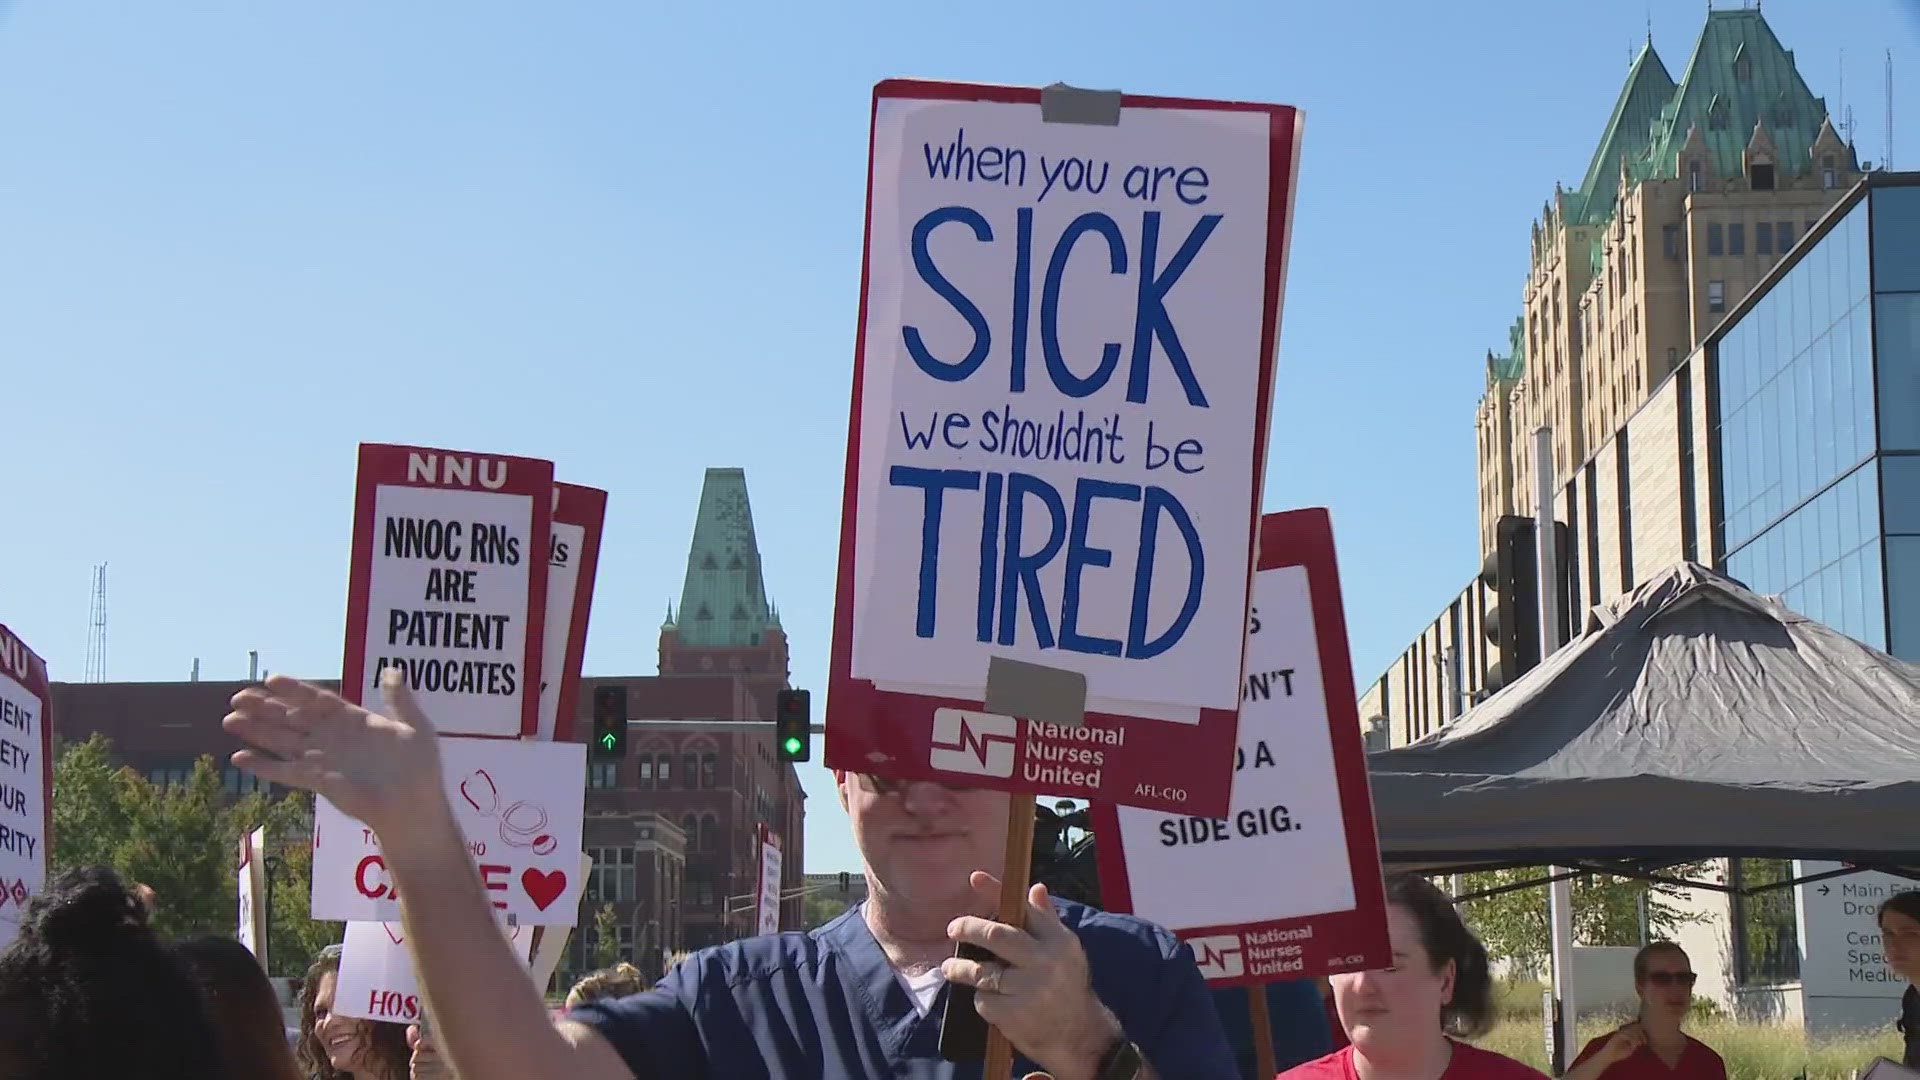 The strike began 7 a.m. Monday and is scheduled to end at 6:59 a.m. Tuesday. SSM Health said there will be no disruption to care.